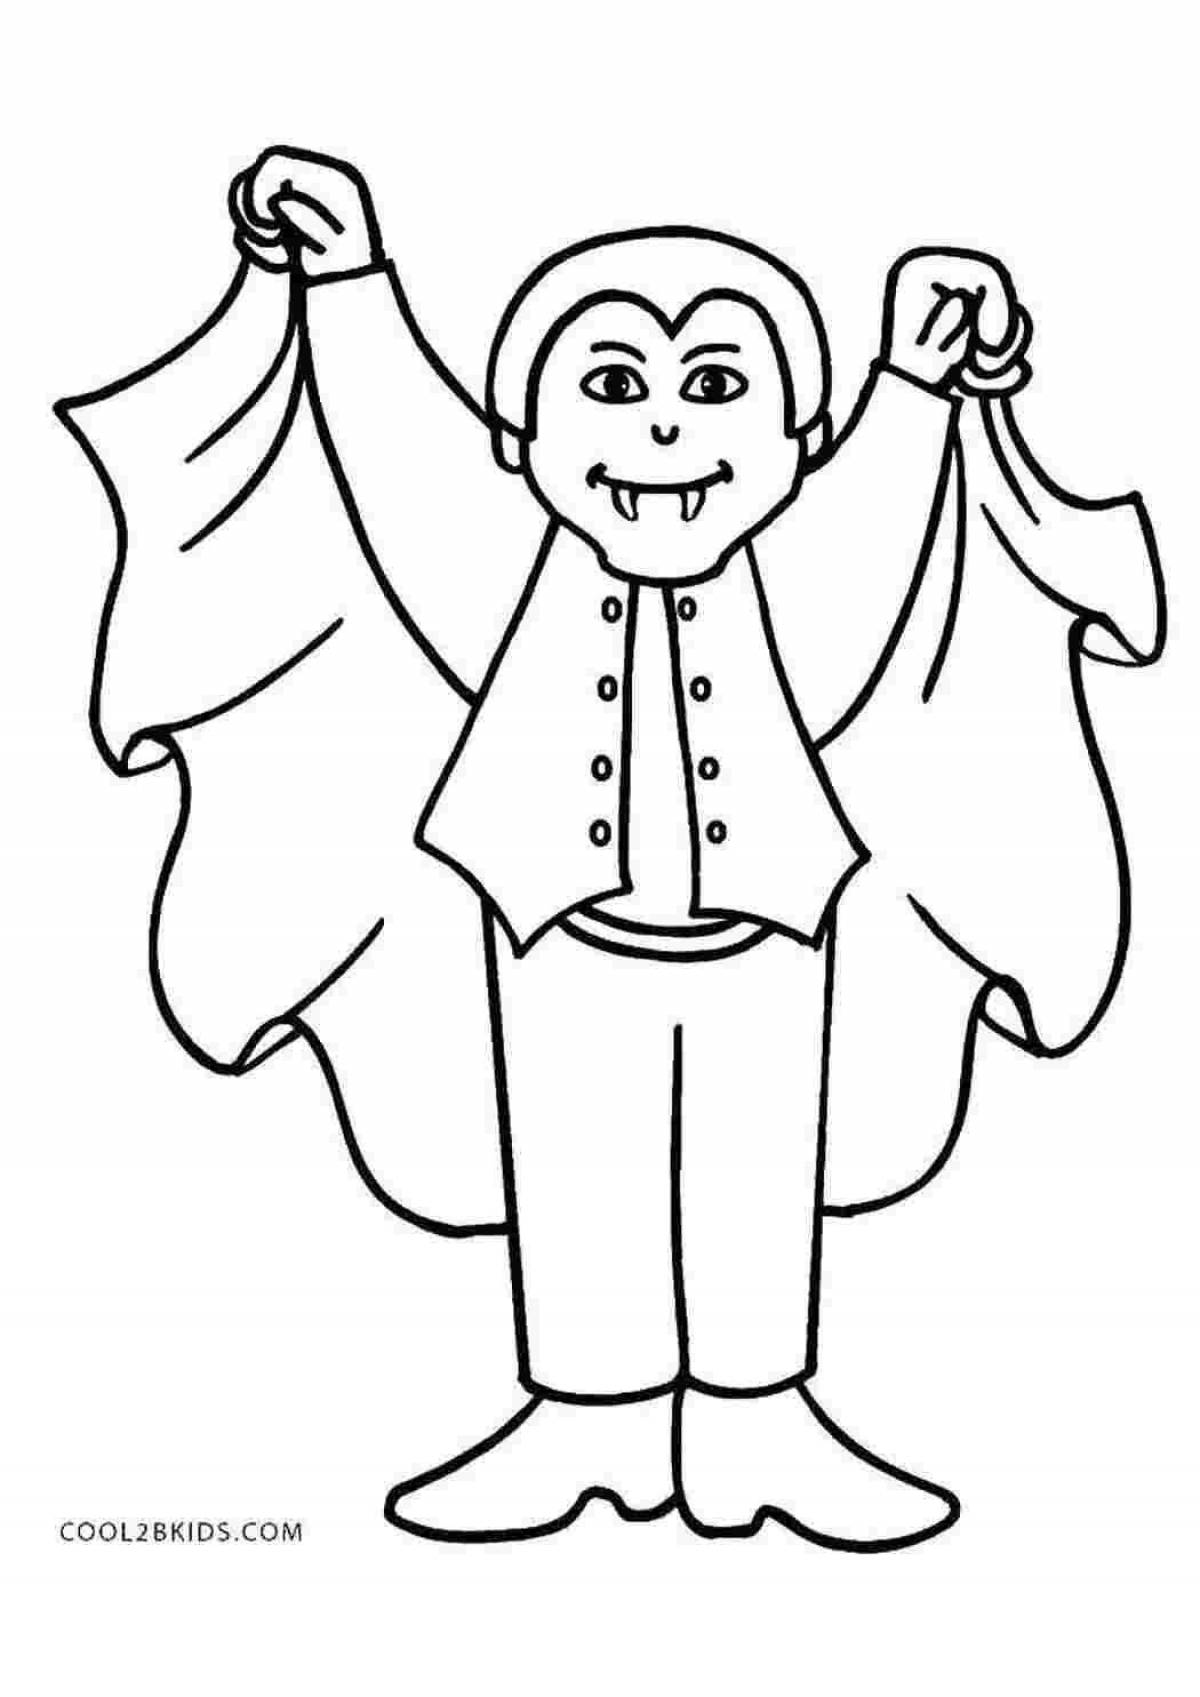 Unholy vampire coloring page